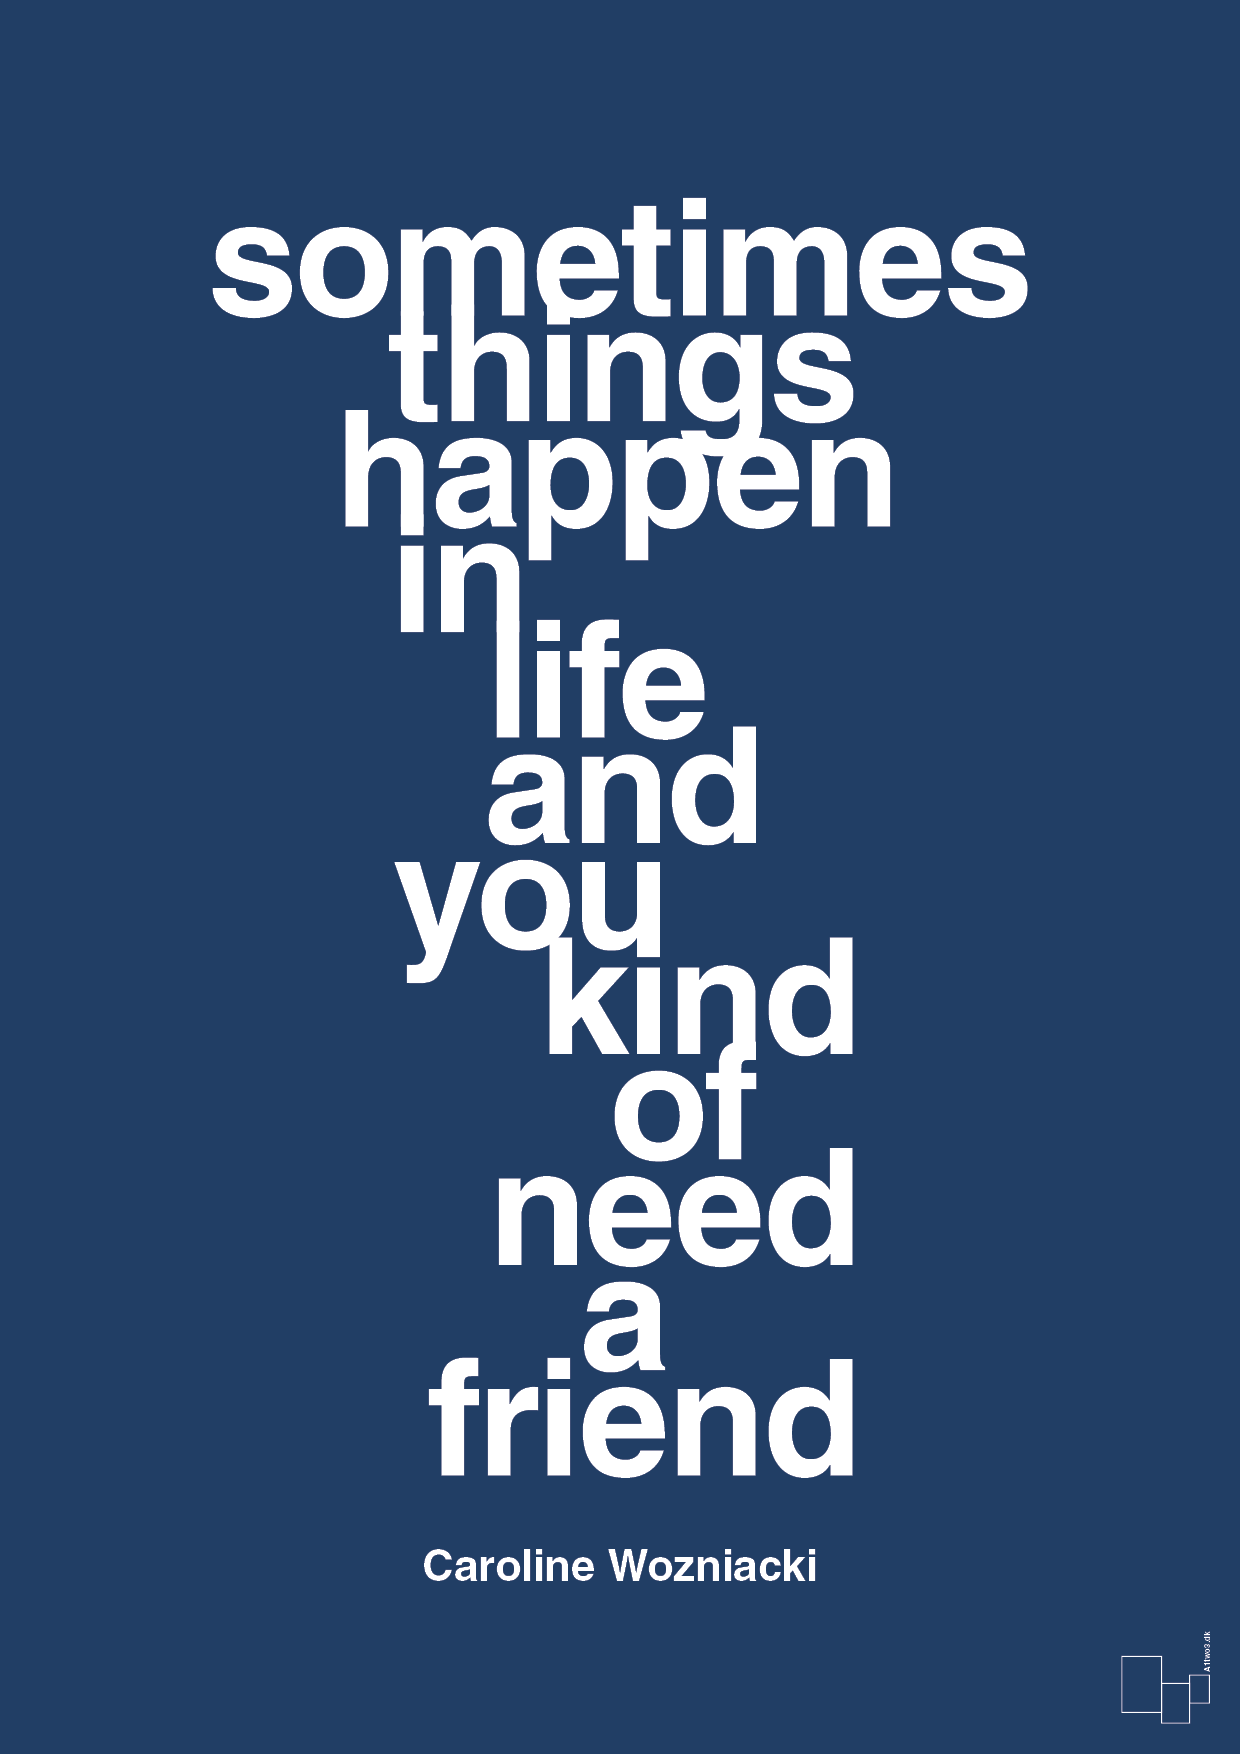 sometimes things happen in life and you kind of need a friend - Plakat med Citater i Lapis Blue